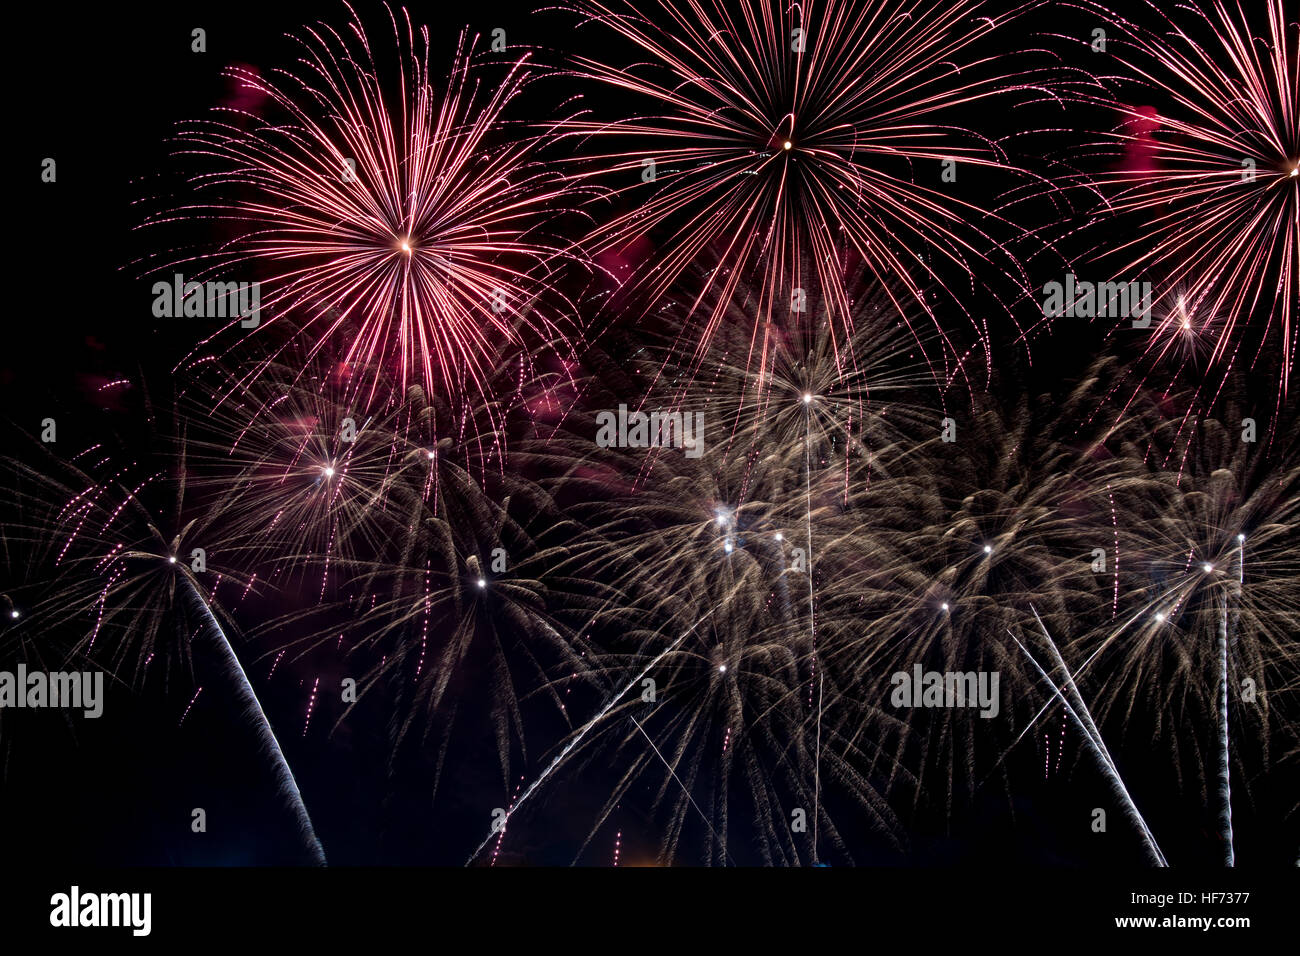 Fireworks colorful explosion of color brightness uae dubai dfc guinness worl record holder Stock Photo